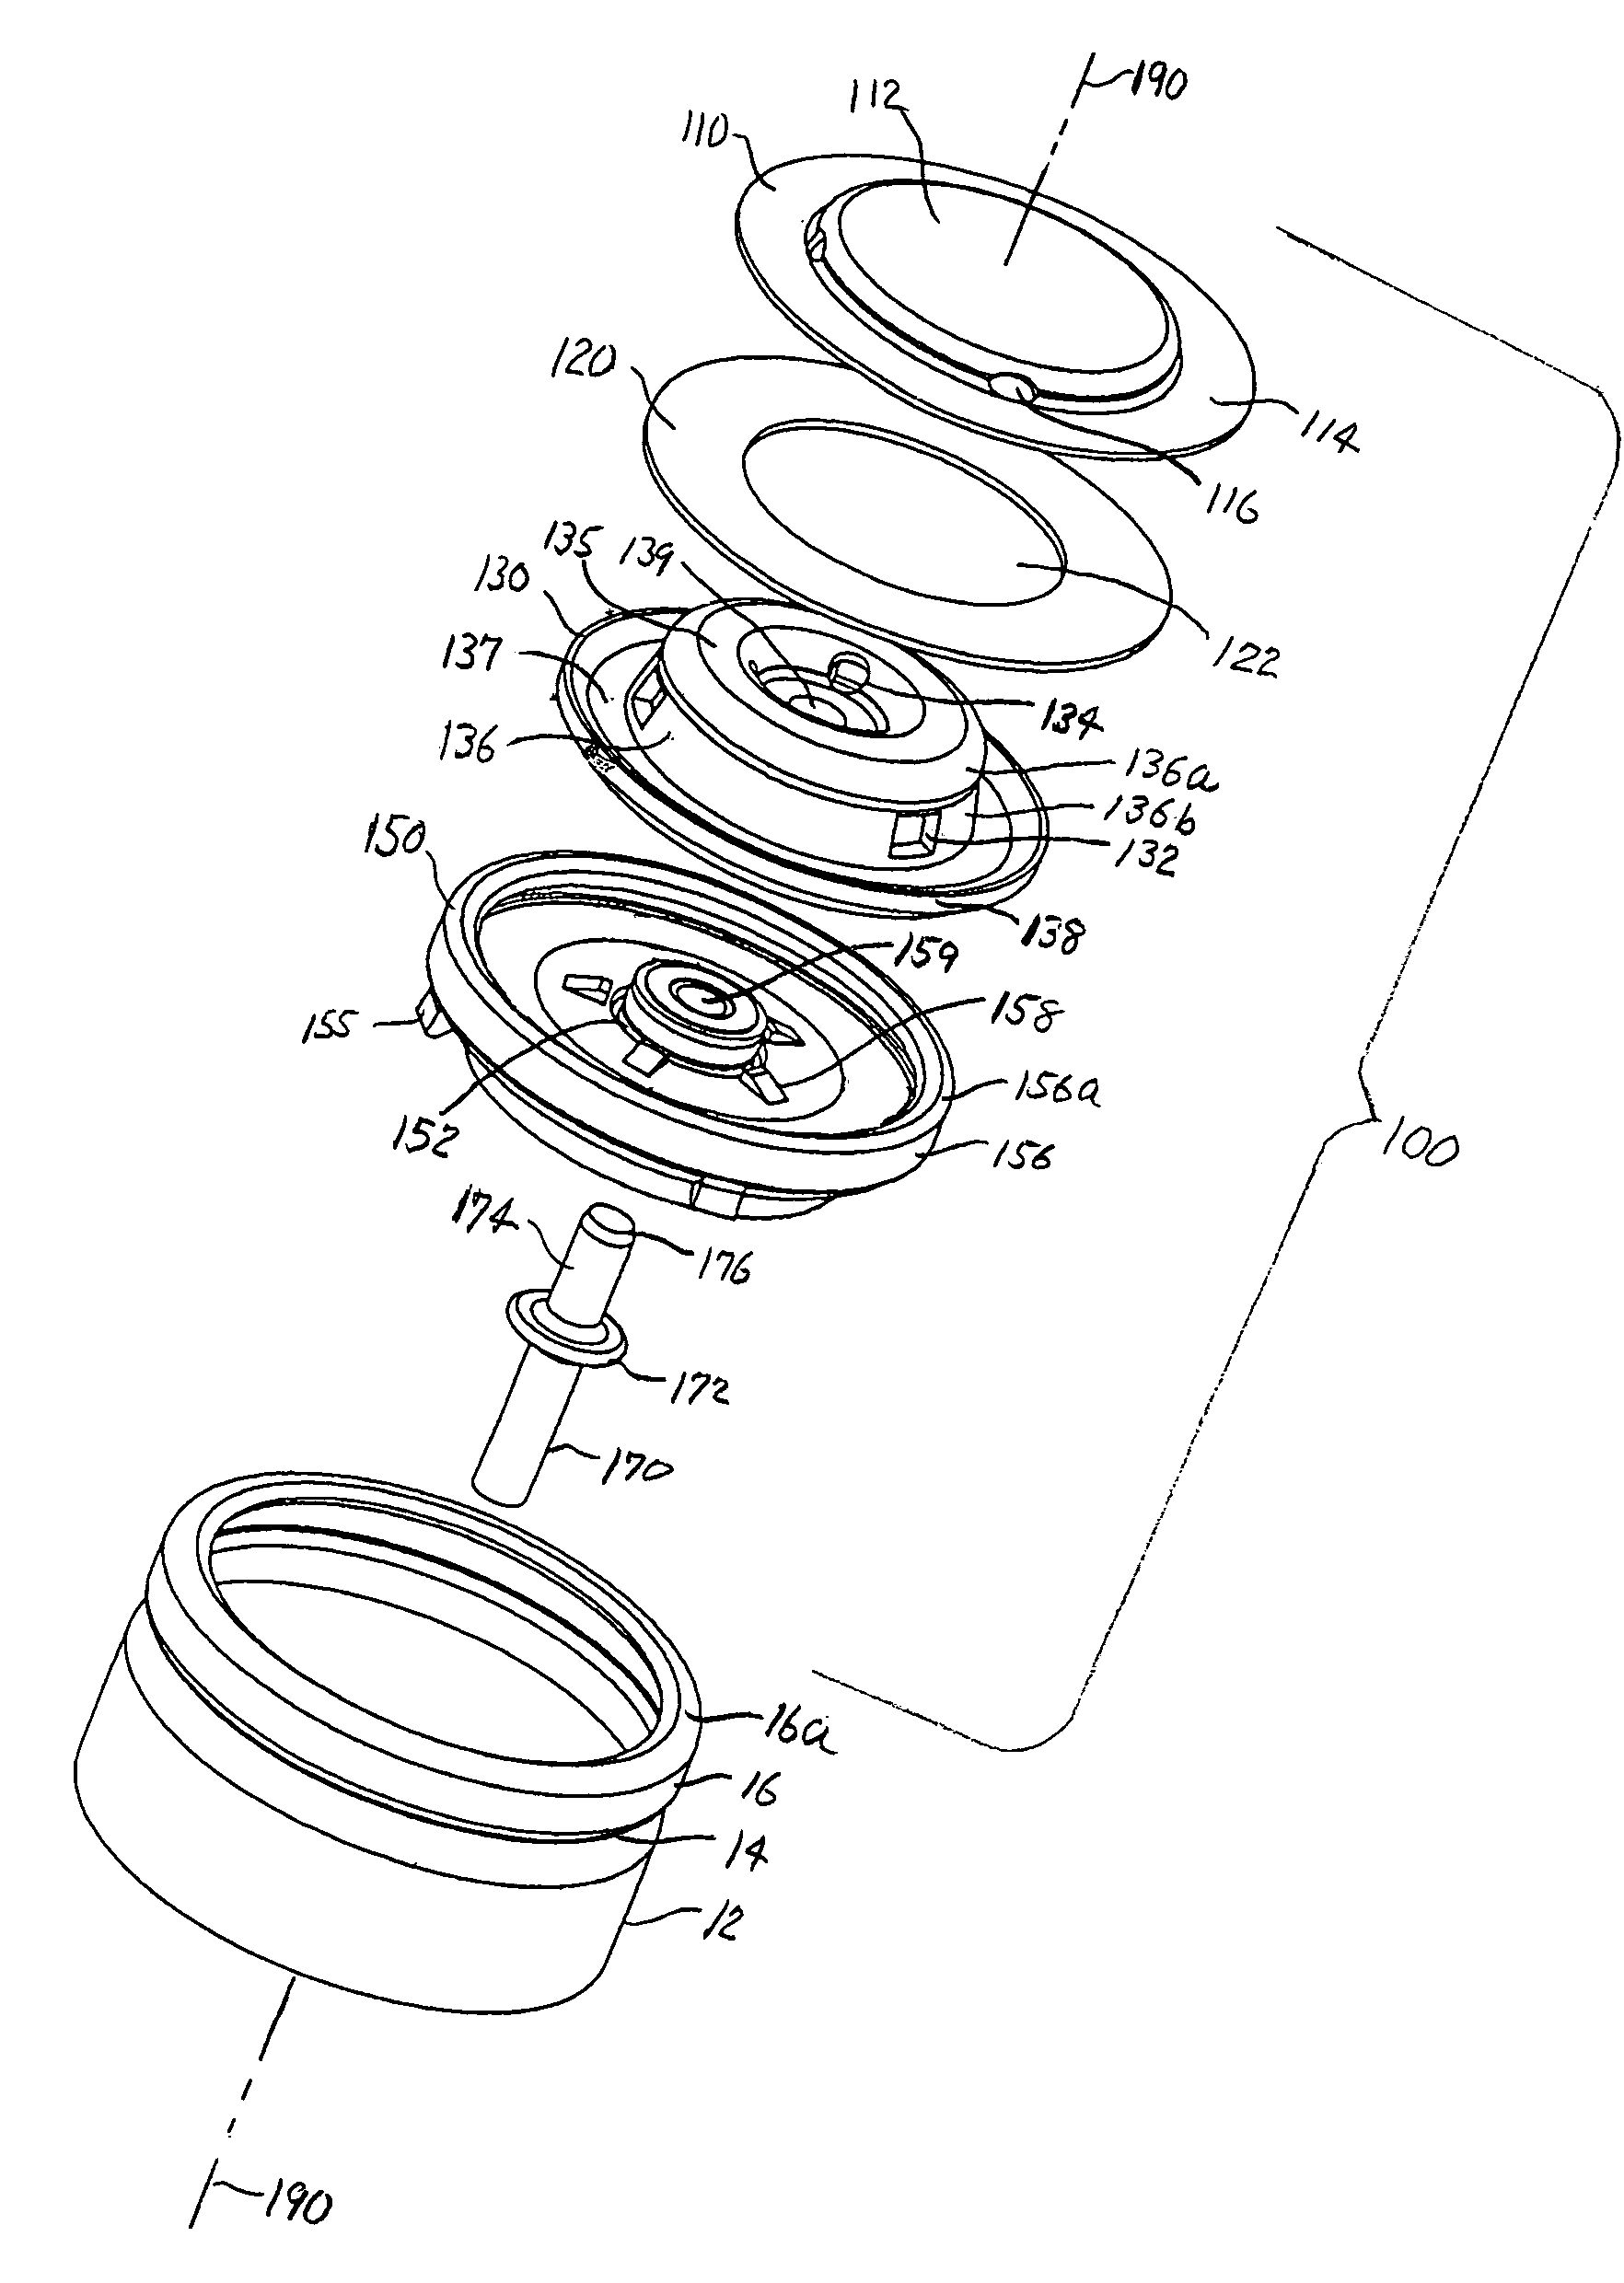 End cap assembly and vent for high power cells